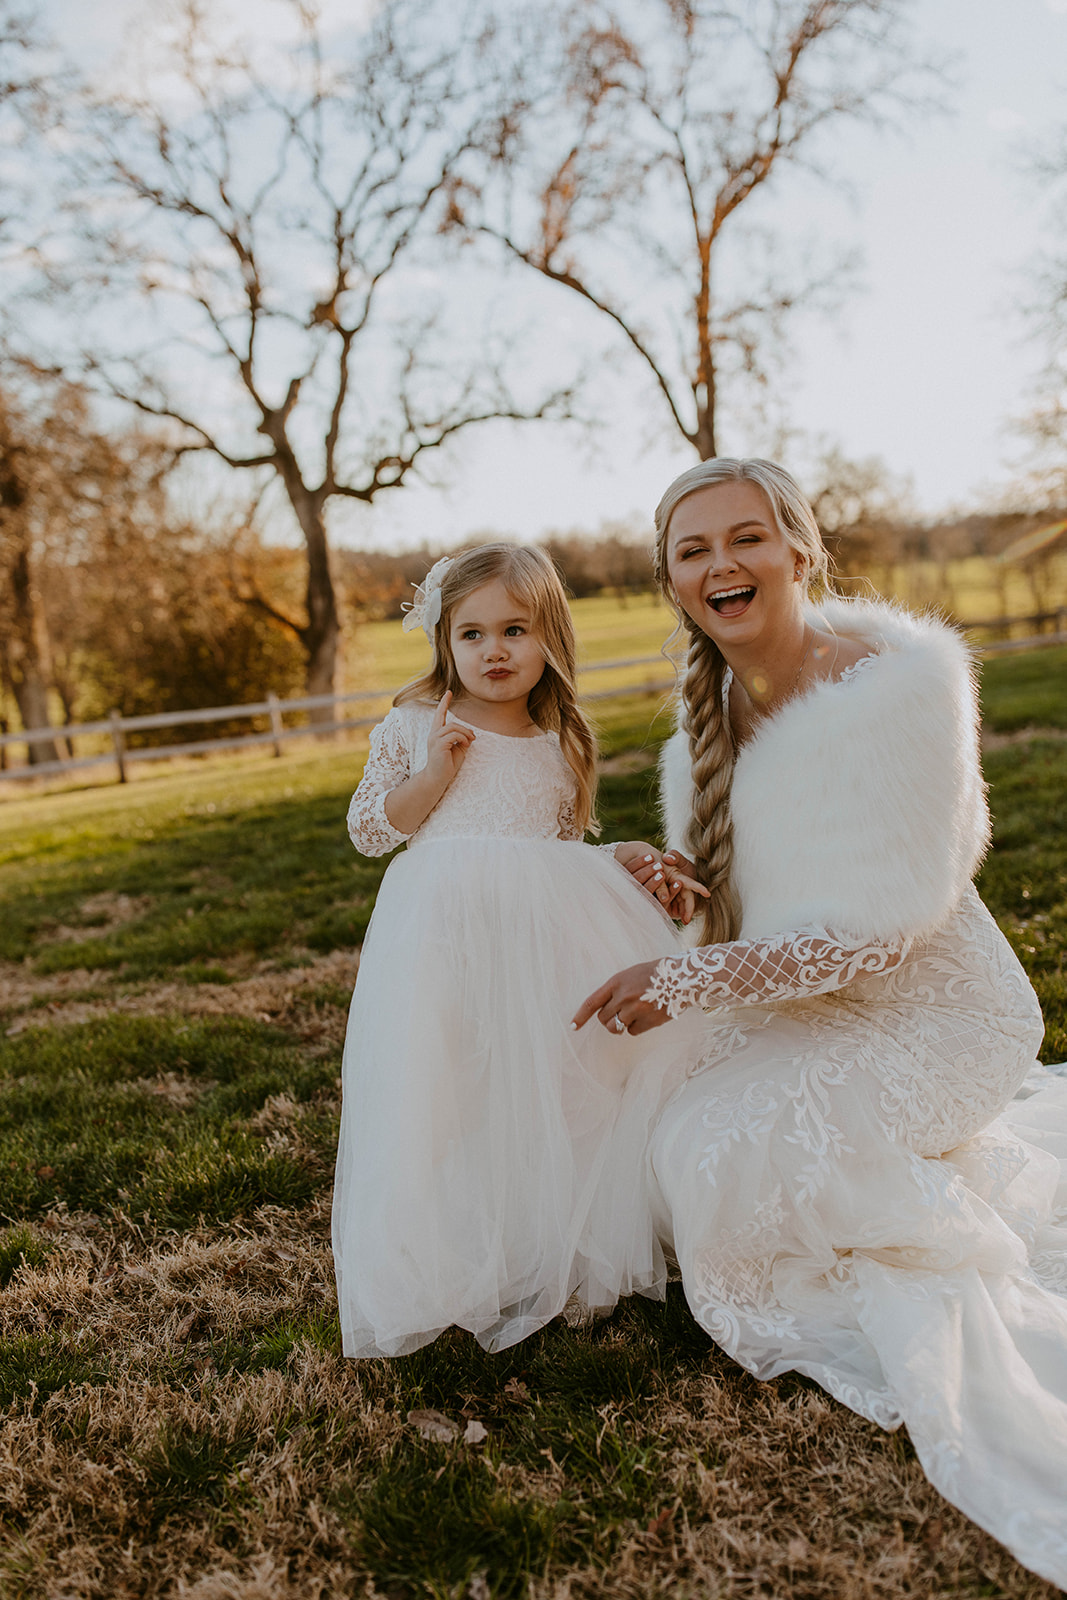 a bride poses for a cute photo with her flower girl at an outdoor winter wedding ceremony
